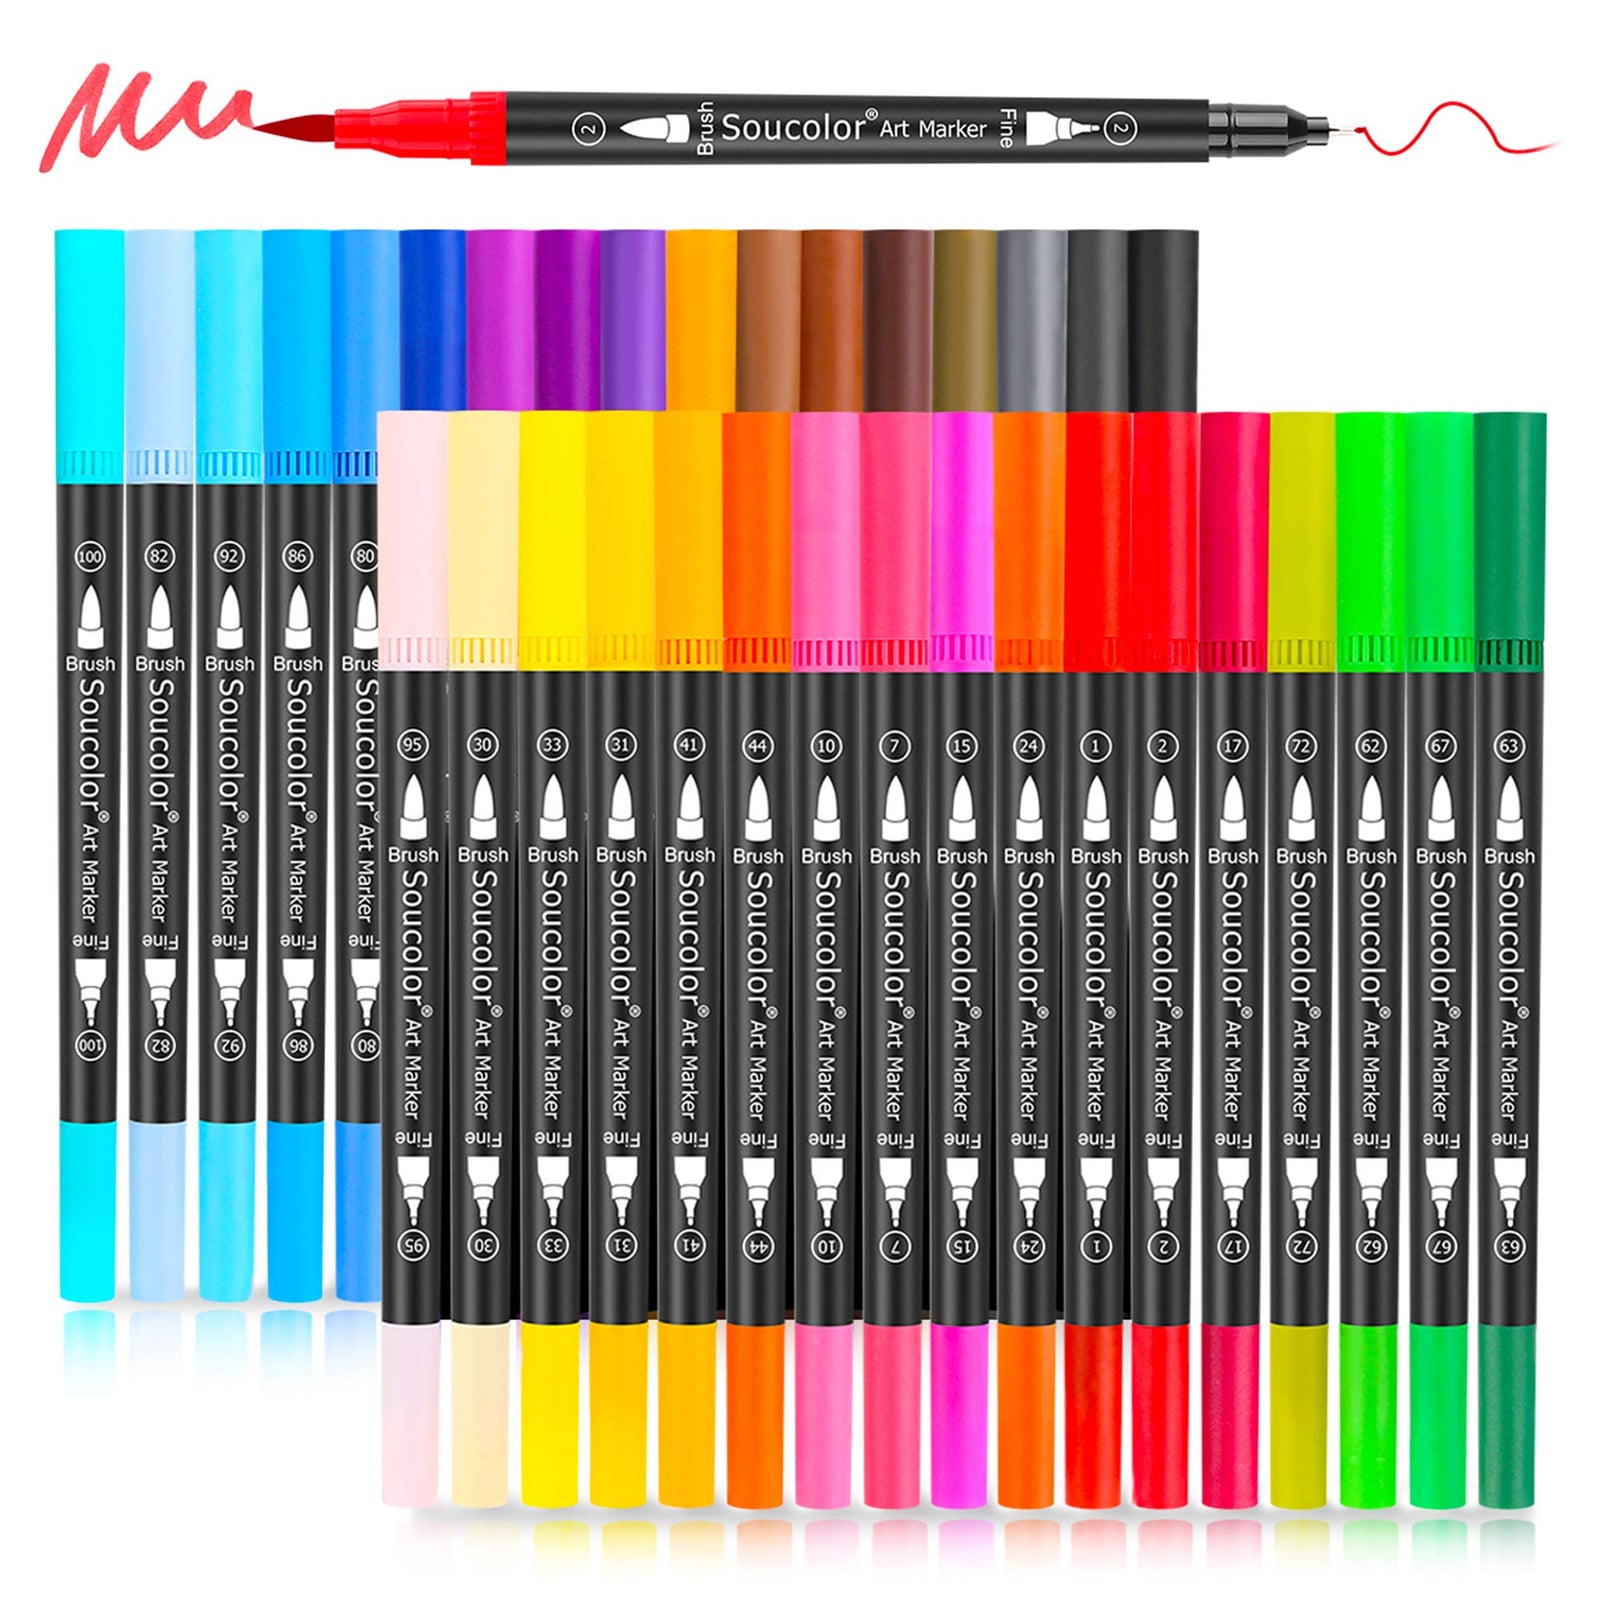 Artist Brush Markers Pens for Adult Coloring Books, 34 Colors Numbered Dual Tip (Brush and Fineliner) Art Marker Pen for Note taking Planner Hand Lettering Calligraphy Drawing Writing Journaling